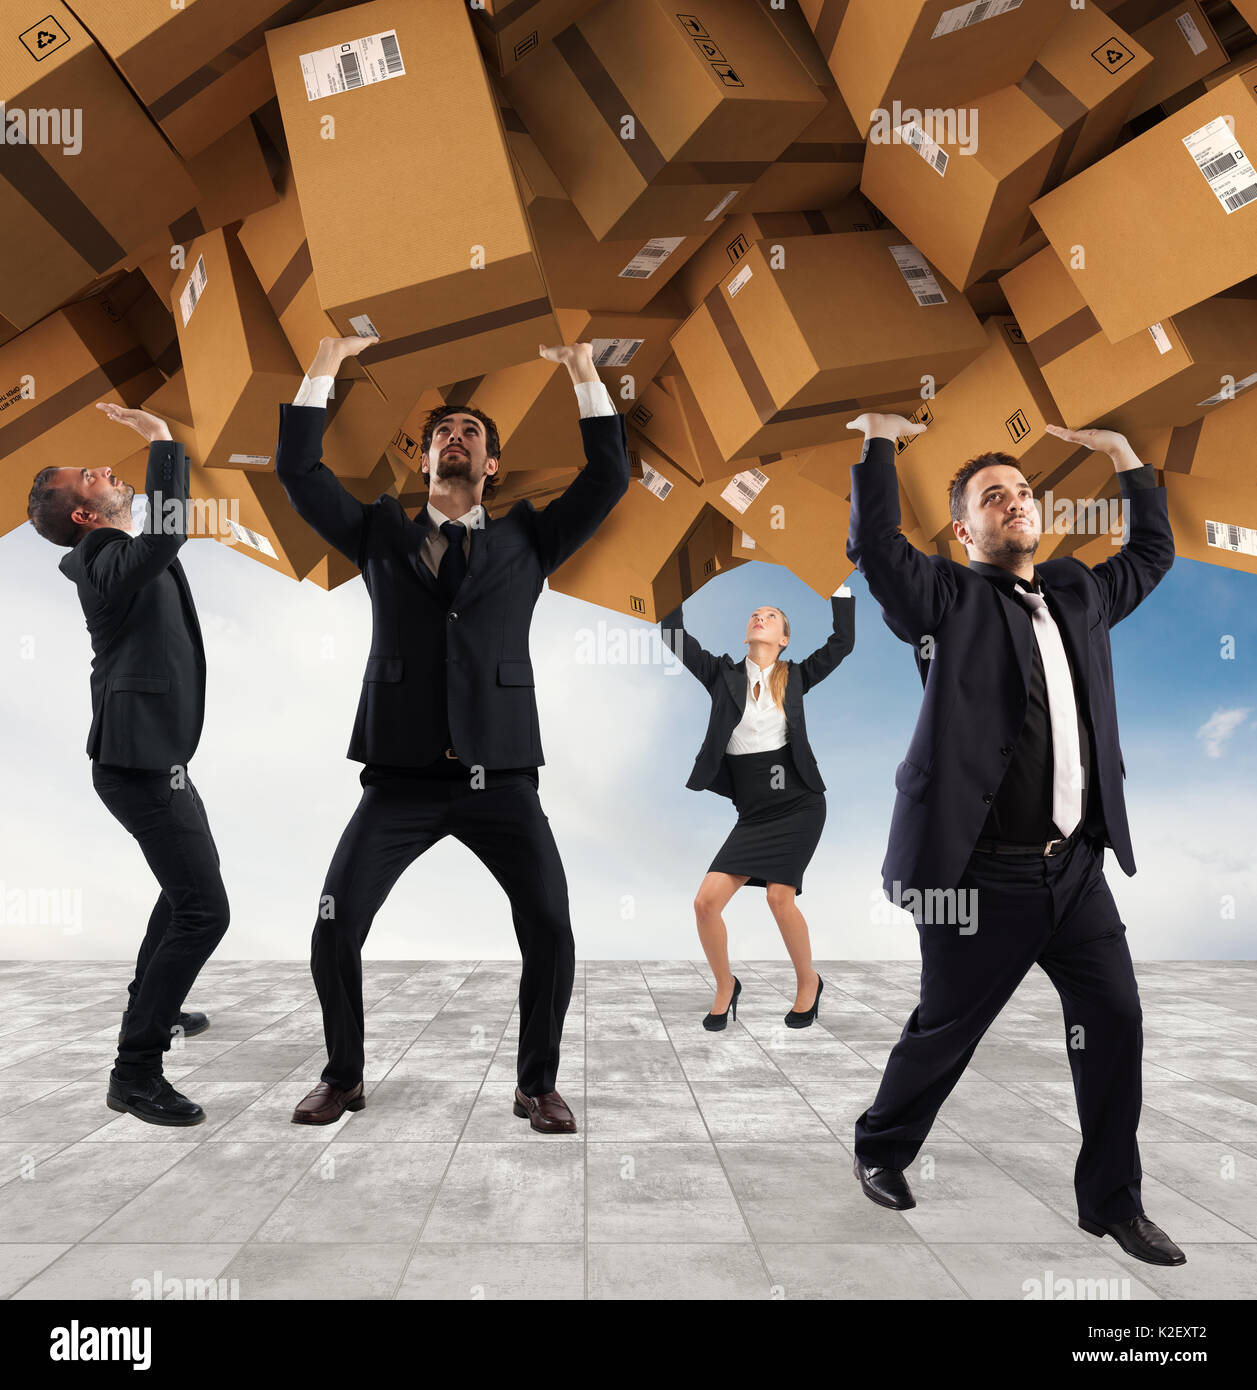 People buried by a stack of cardboard boxes. Concept of internet shopping addiction Stock Photo